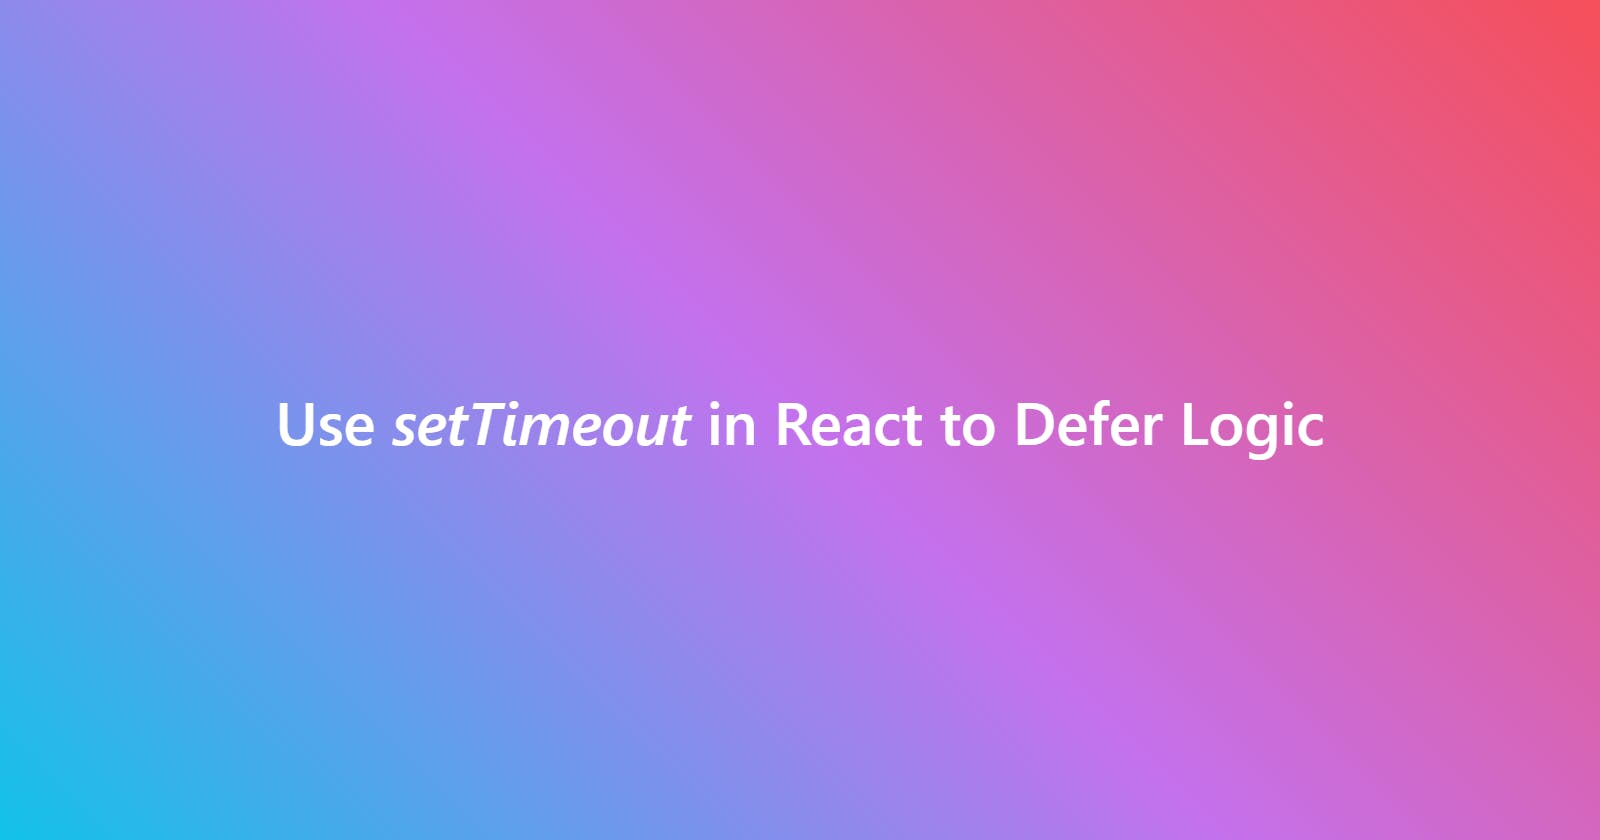 Use setTimeout in React to Defer Logic